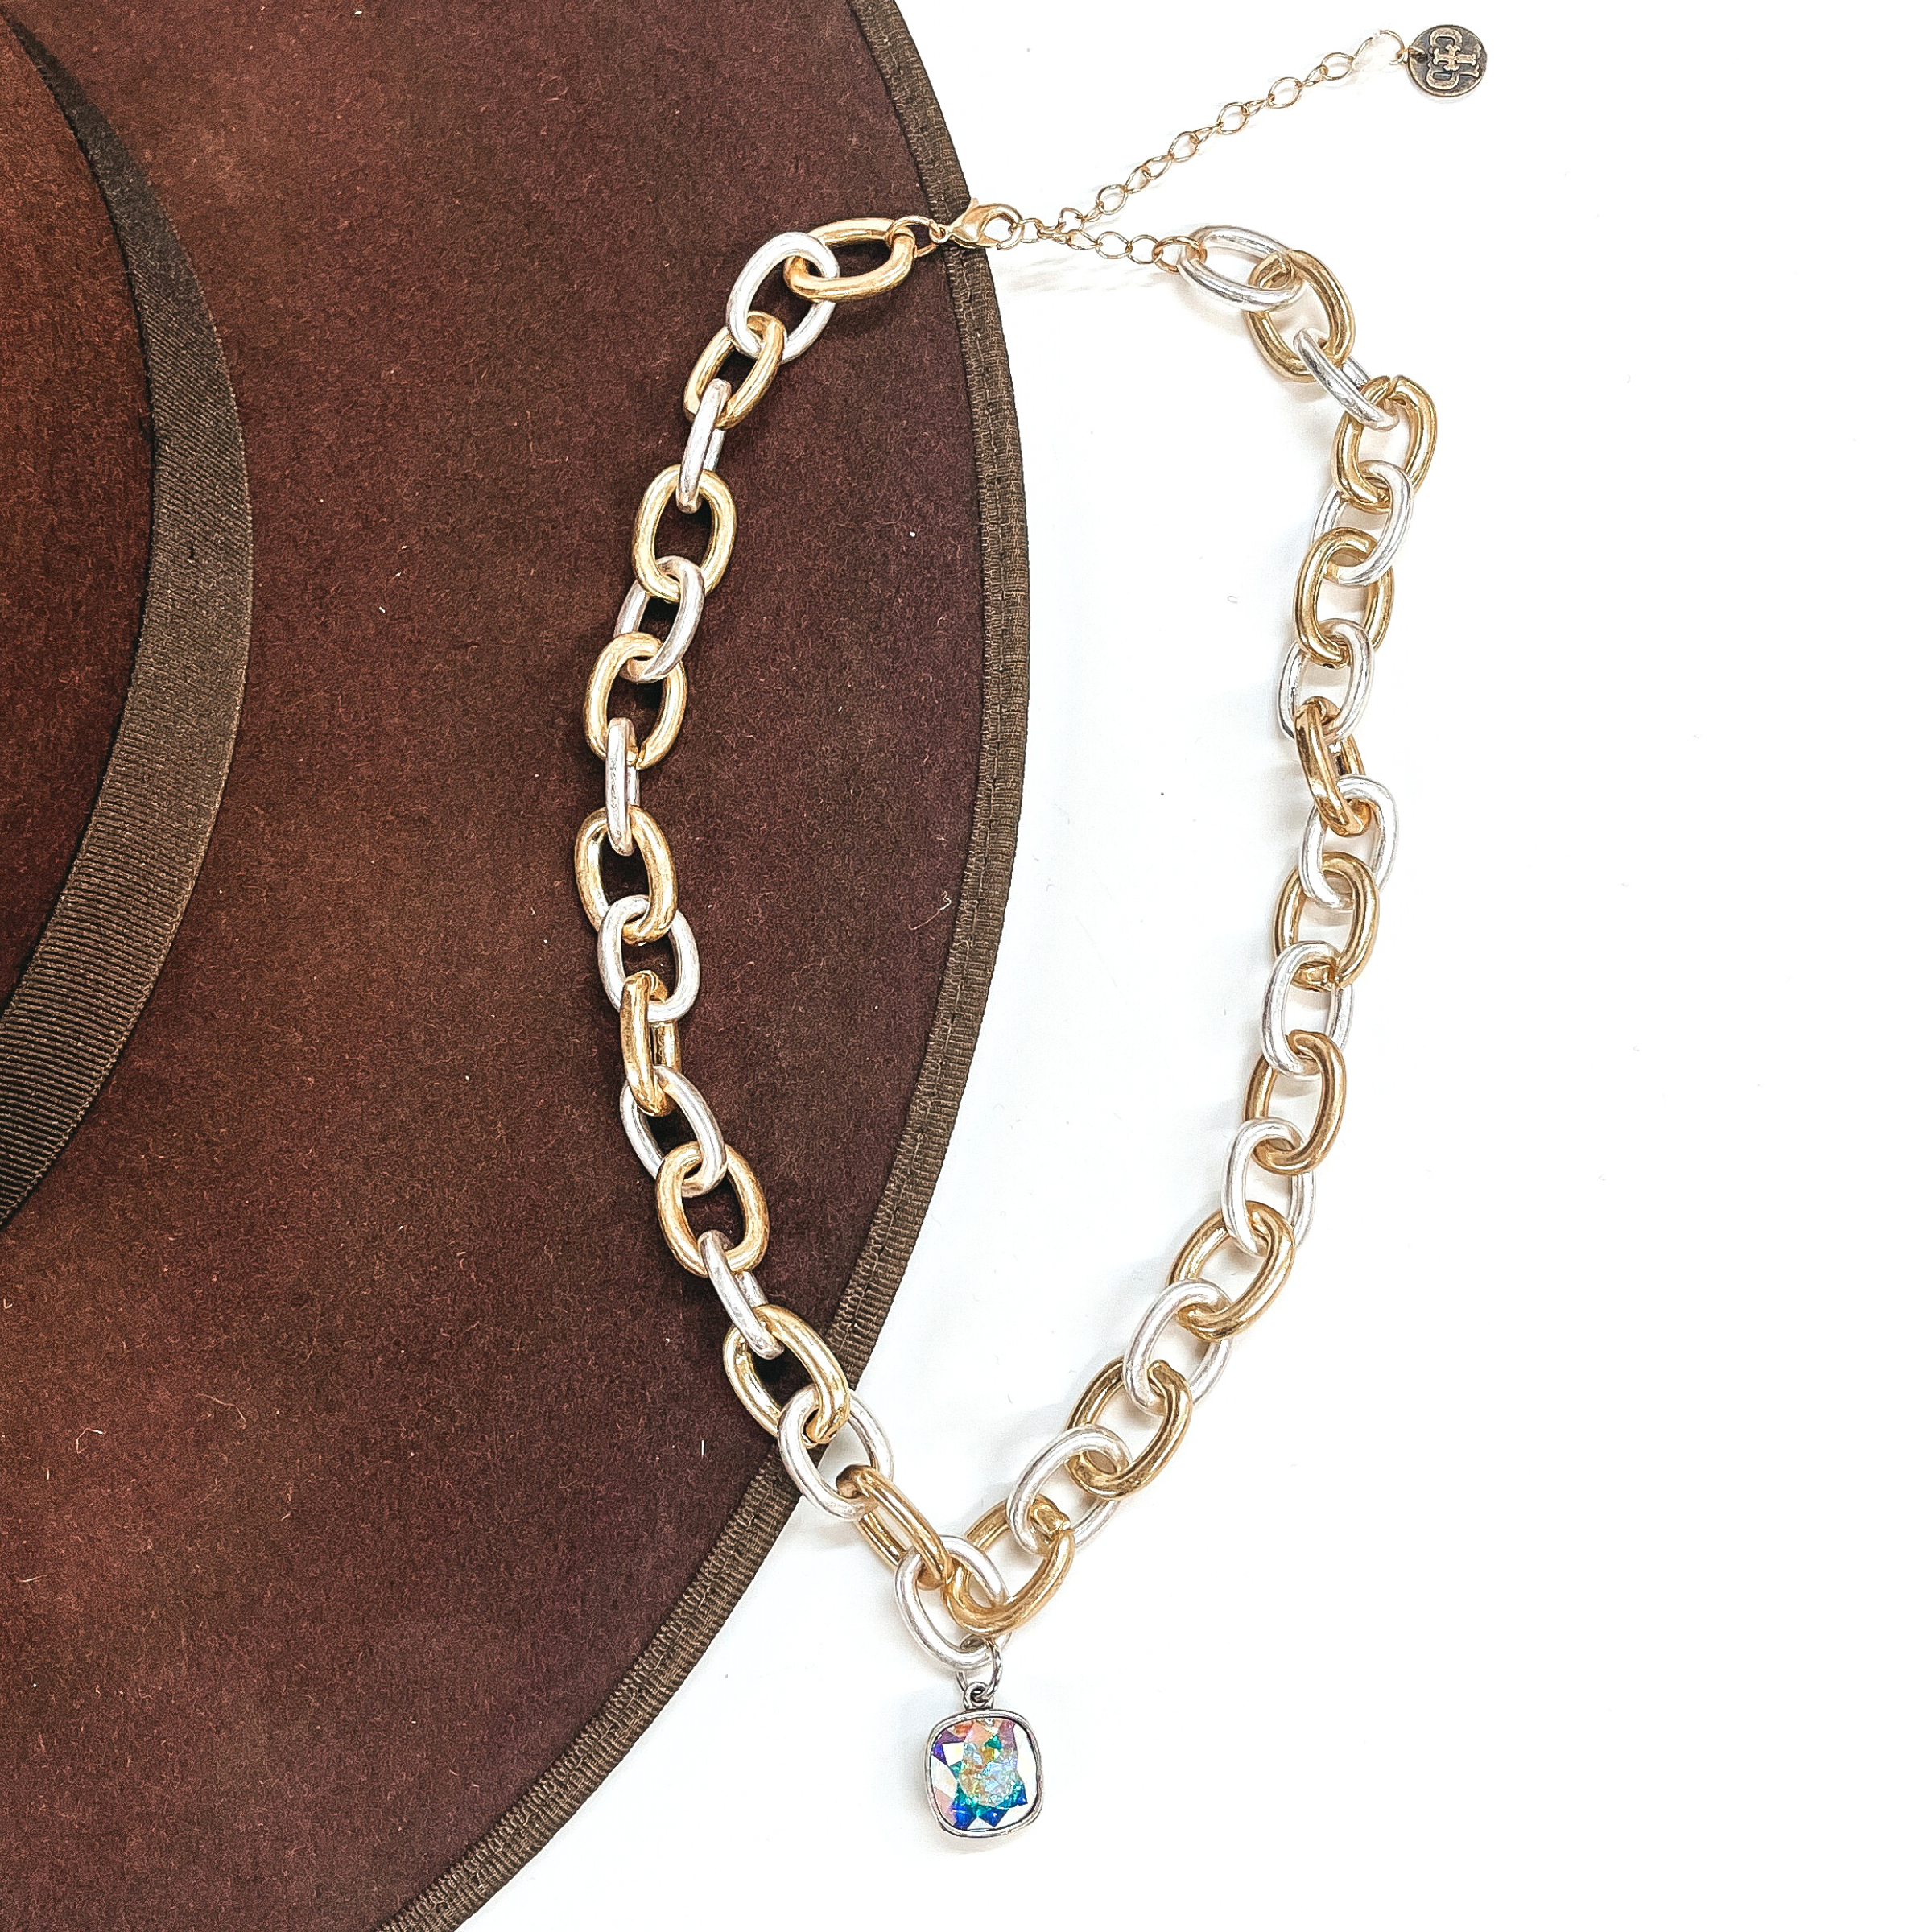 This is silver and gold tone thick linked chain necklace with an AB cushion cut crystal  charm in a silver setting. This necklace is taken laying on a dark brown hat brim  and on a white background.